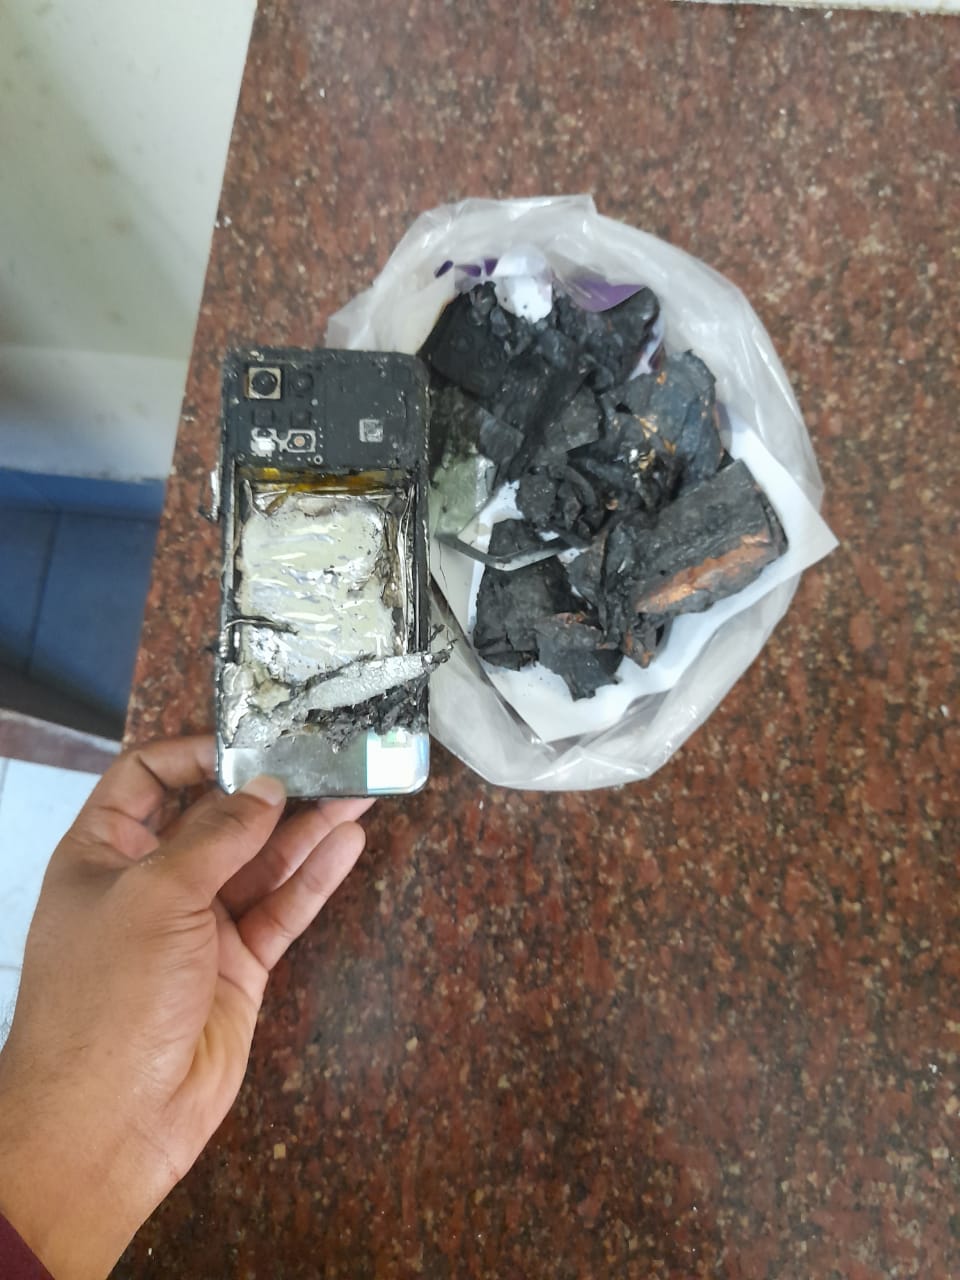 Kerala youth injured after mobile phone explodes in his pants pocket